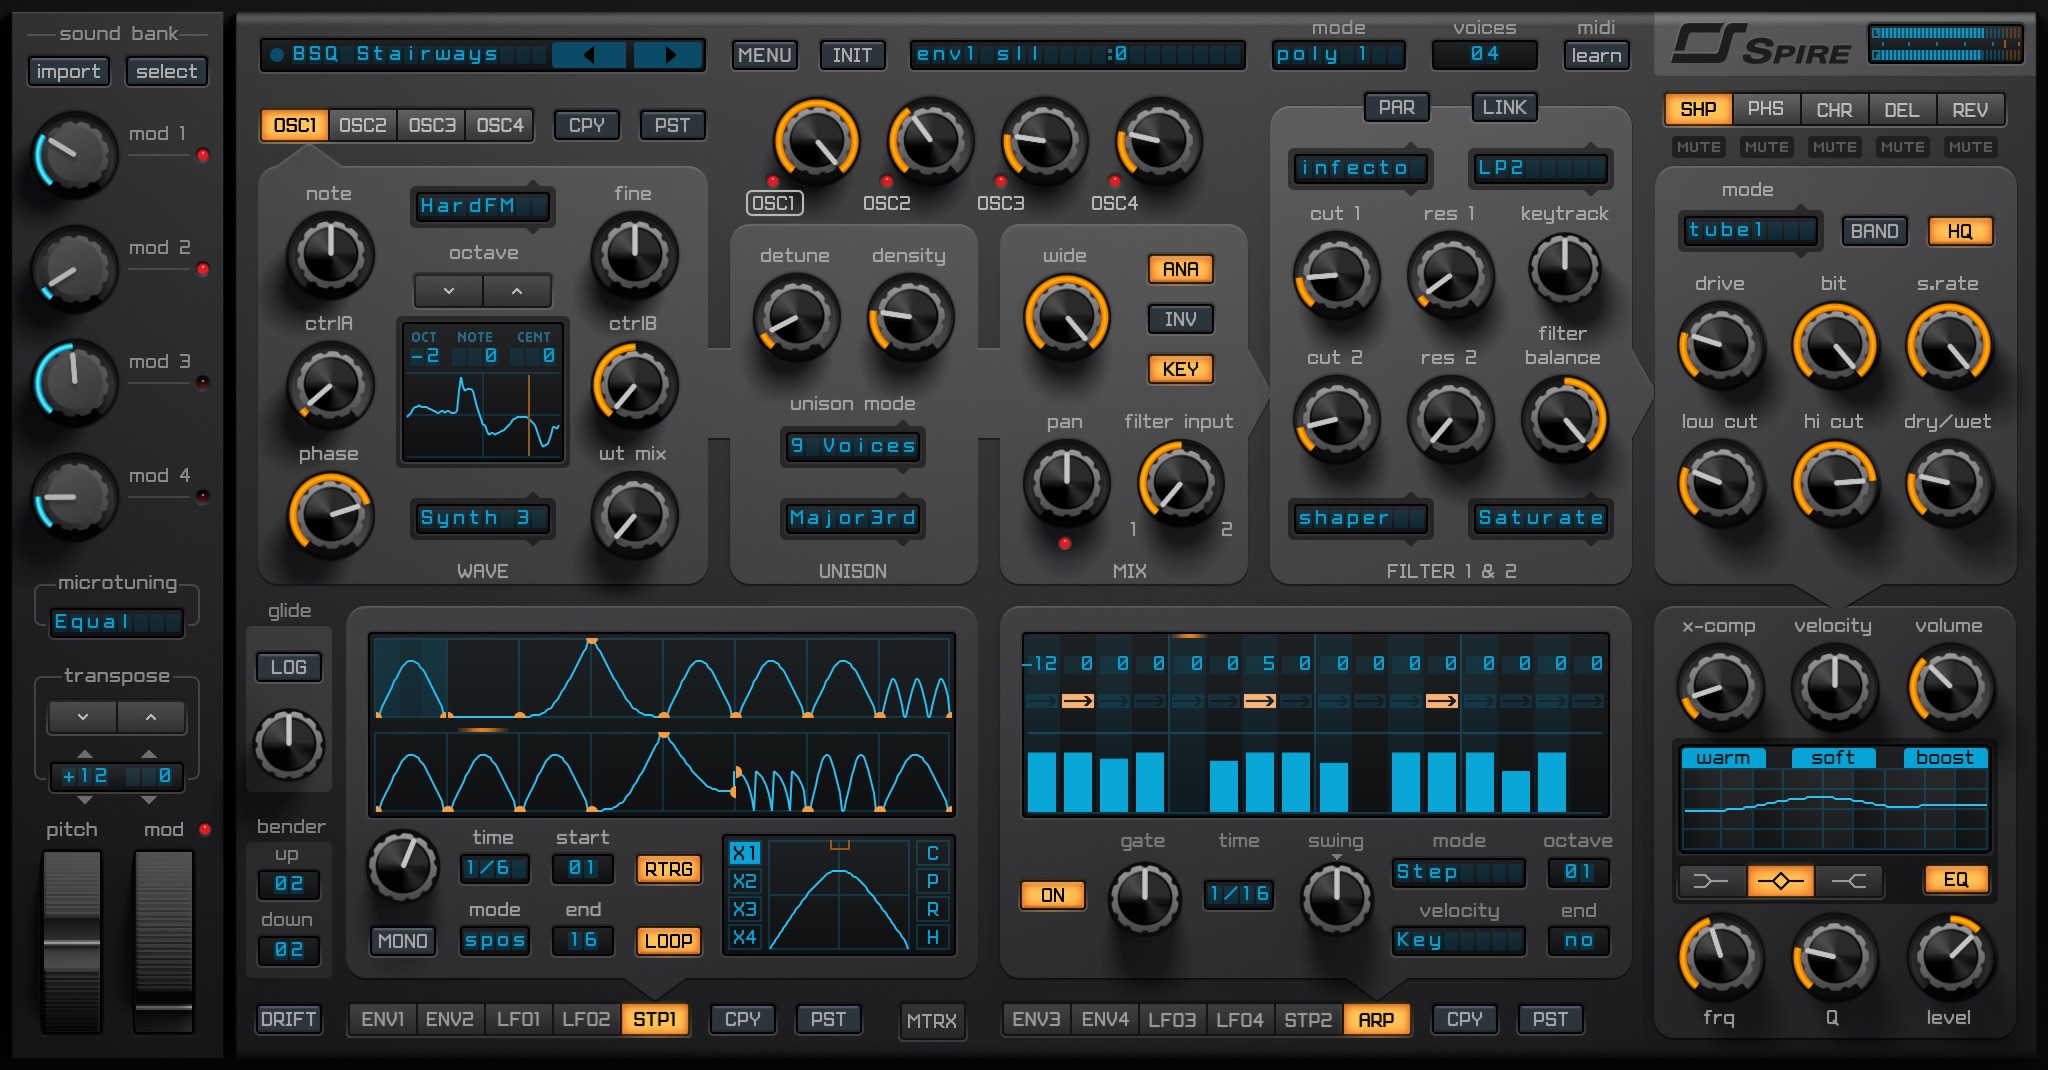 Spire by Reveal Sound - Synth (Analogue / Subtractive) VST ...